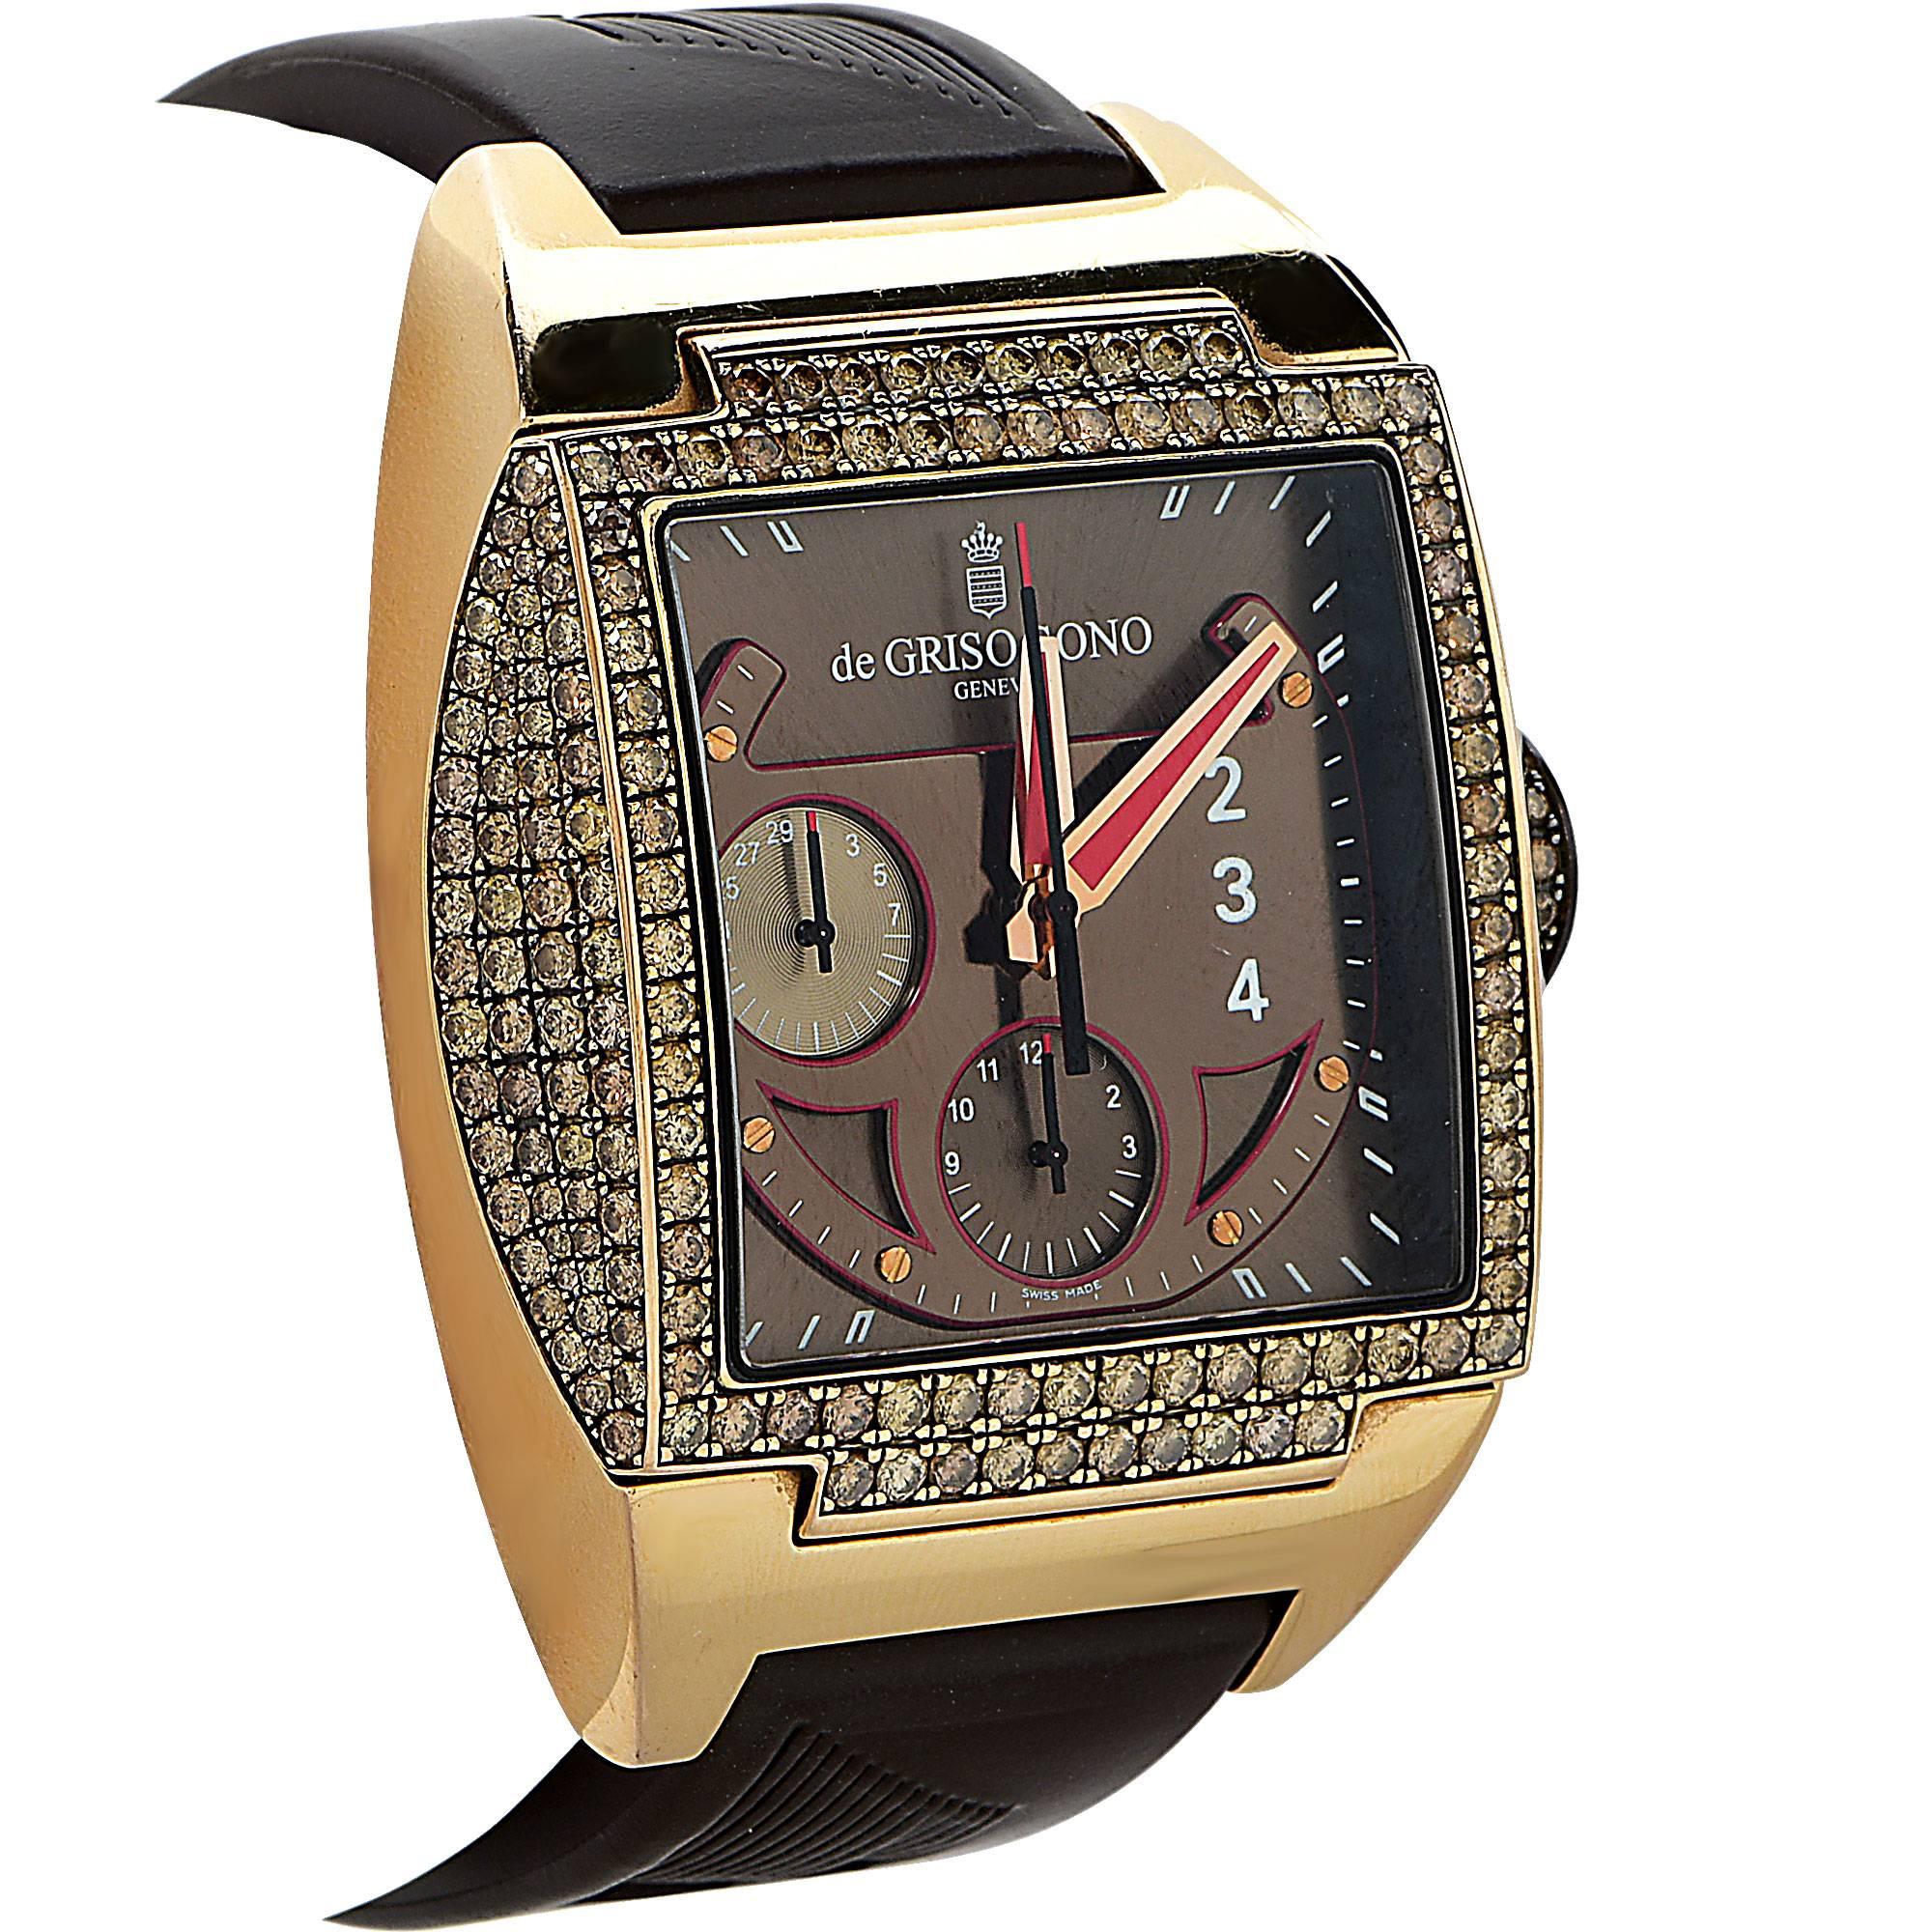 de Grisogono Power Breaker Chocolate No 5 Rose Gold Diamond Watch.

Metal weight: 214.59 grams

This watch is accompanied by a retail appraisal performed by a Graduate Gemologist.